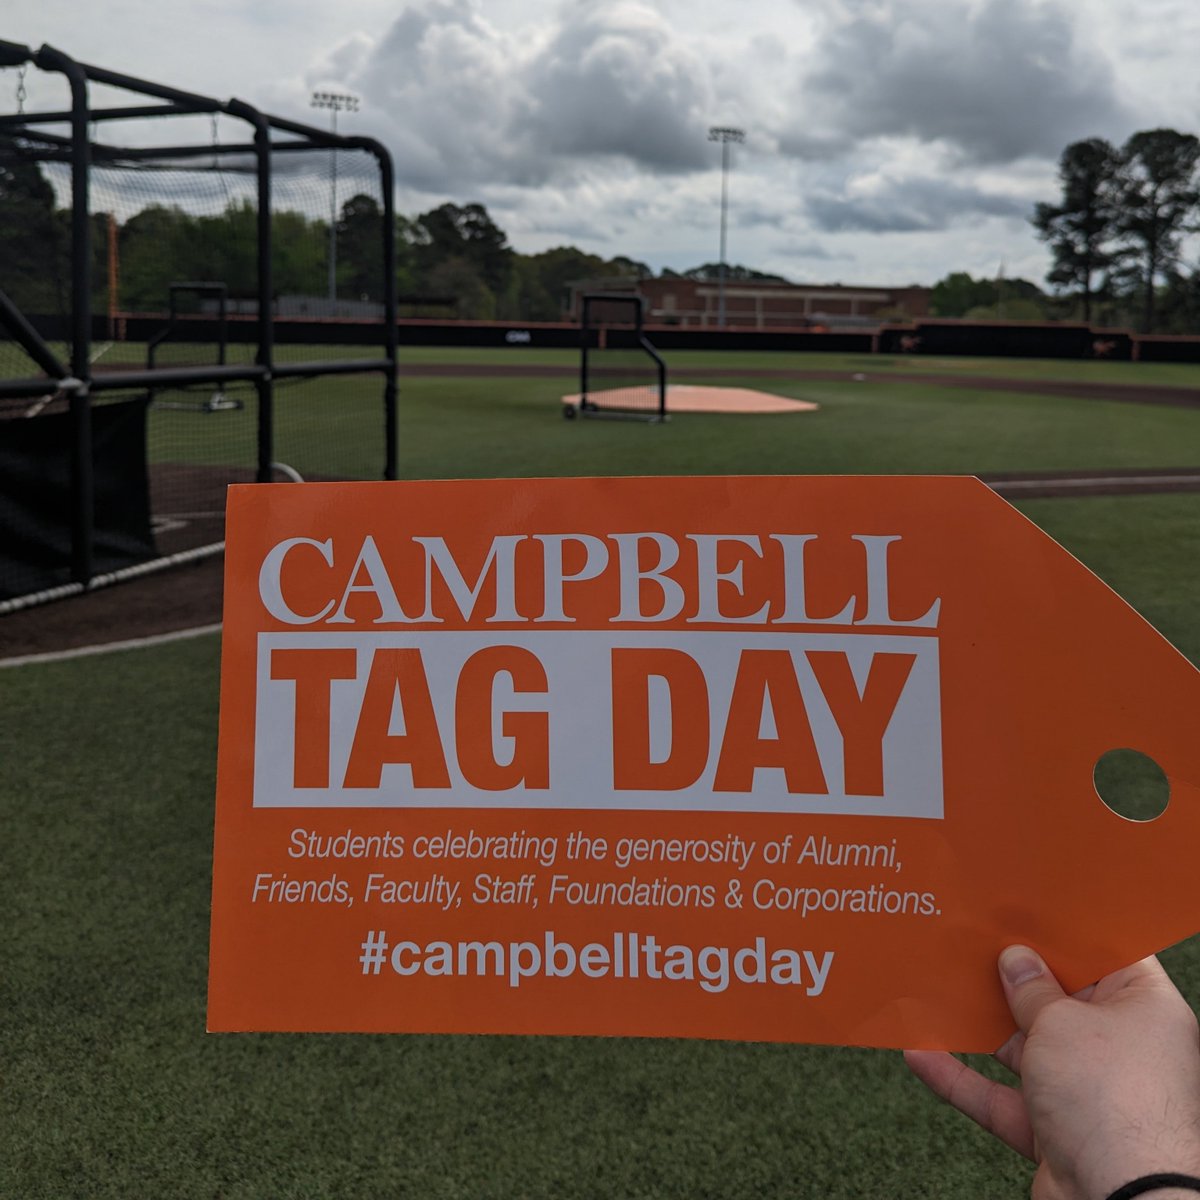 A heartfelt thank you to our alumni, friends, faculty, staff and others for the unwavering support you provide our program. #RDH | #CampbellTAGDay